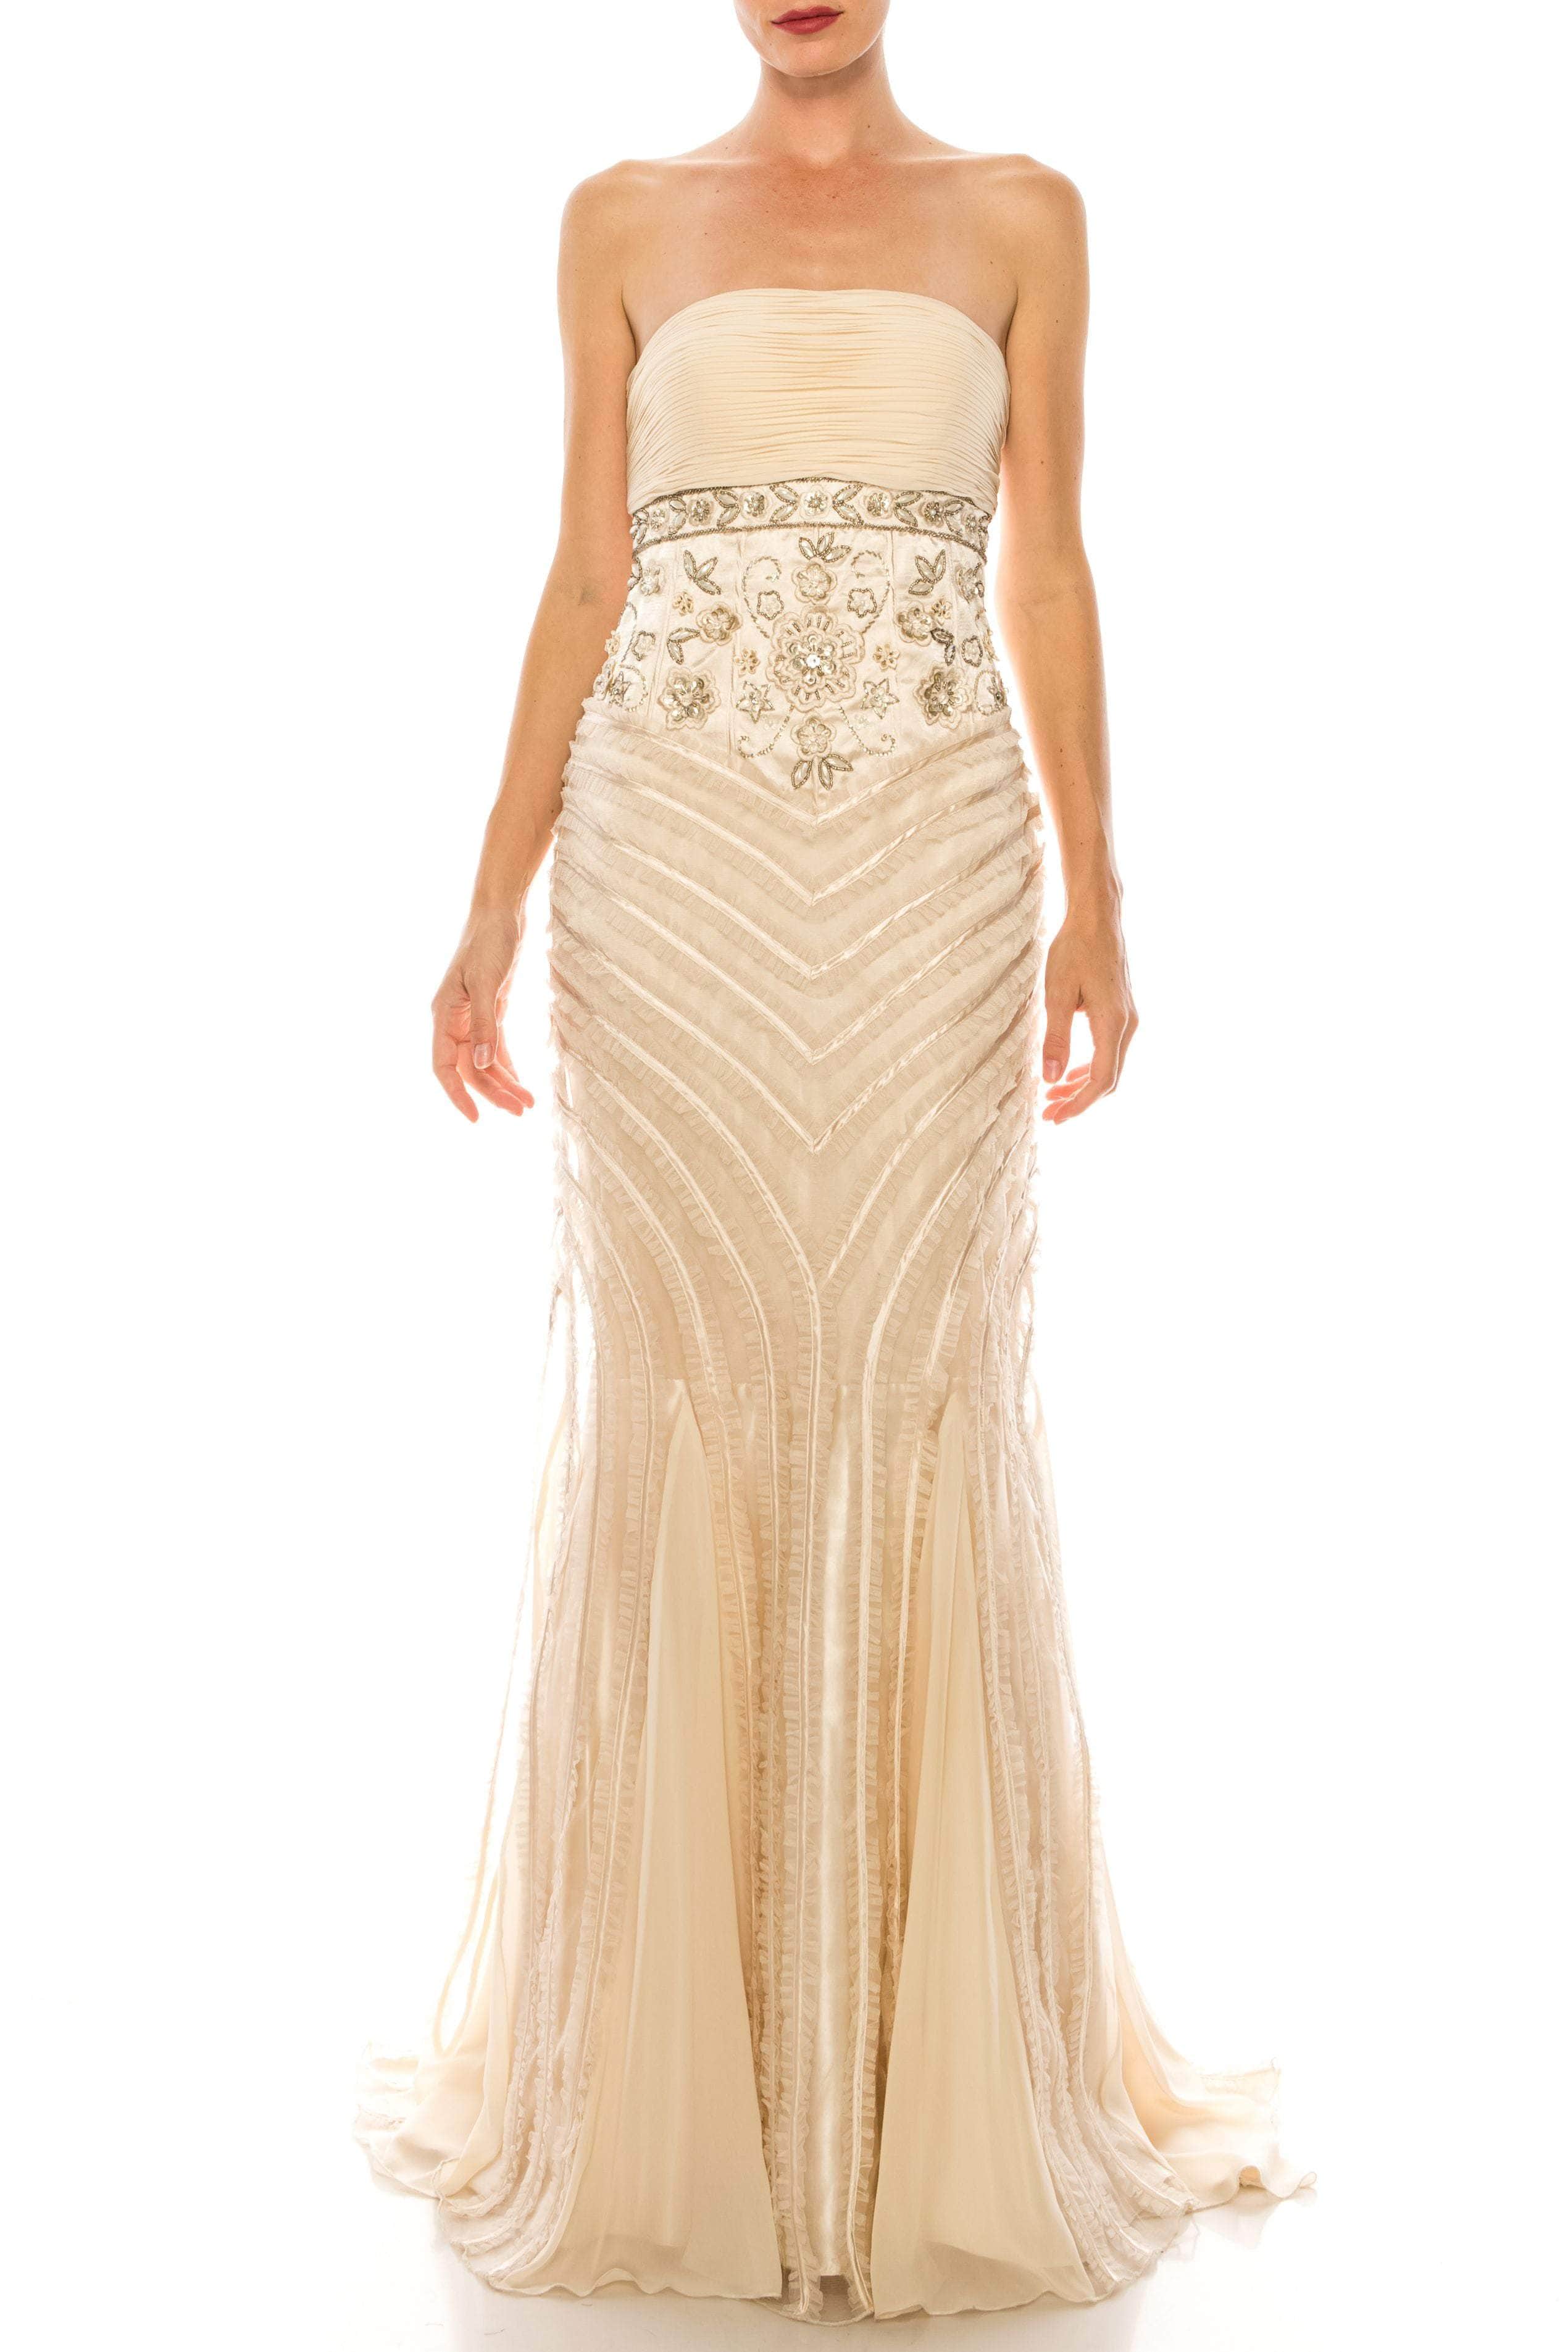 Image of Sue Wong - Strapless Ruffle Trim Mermaid Gown N0230